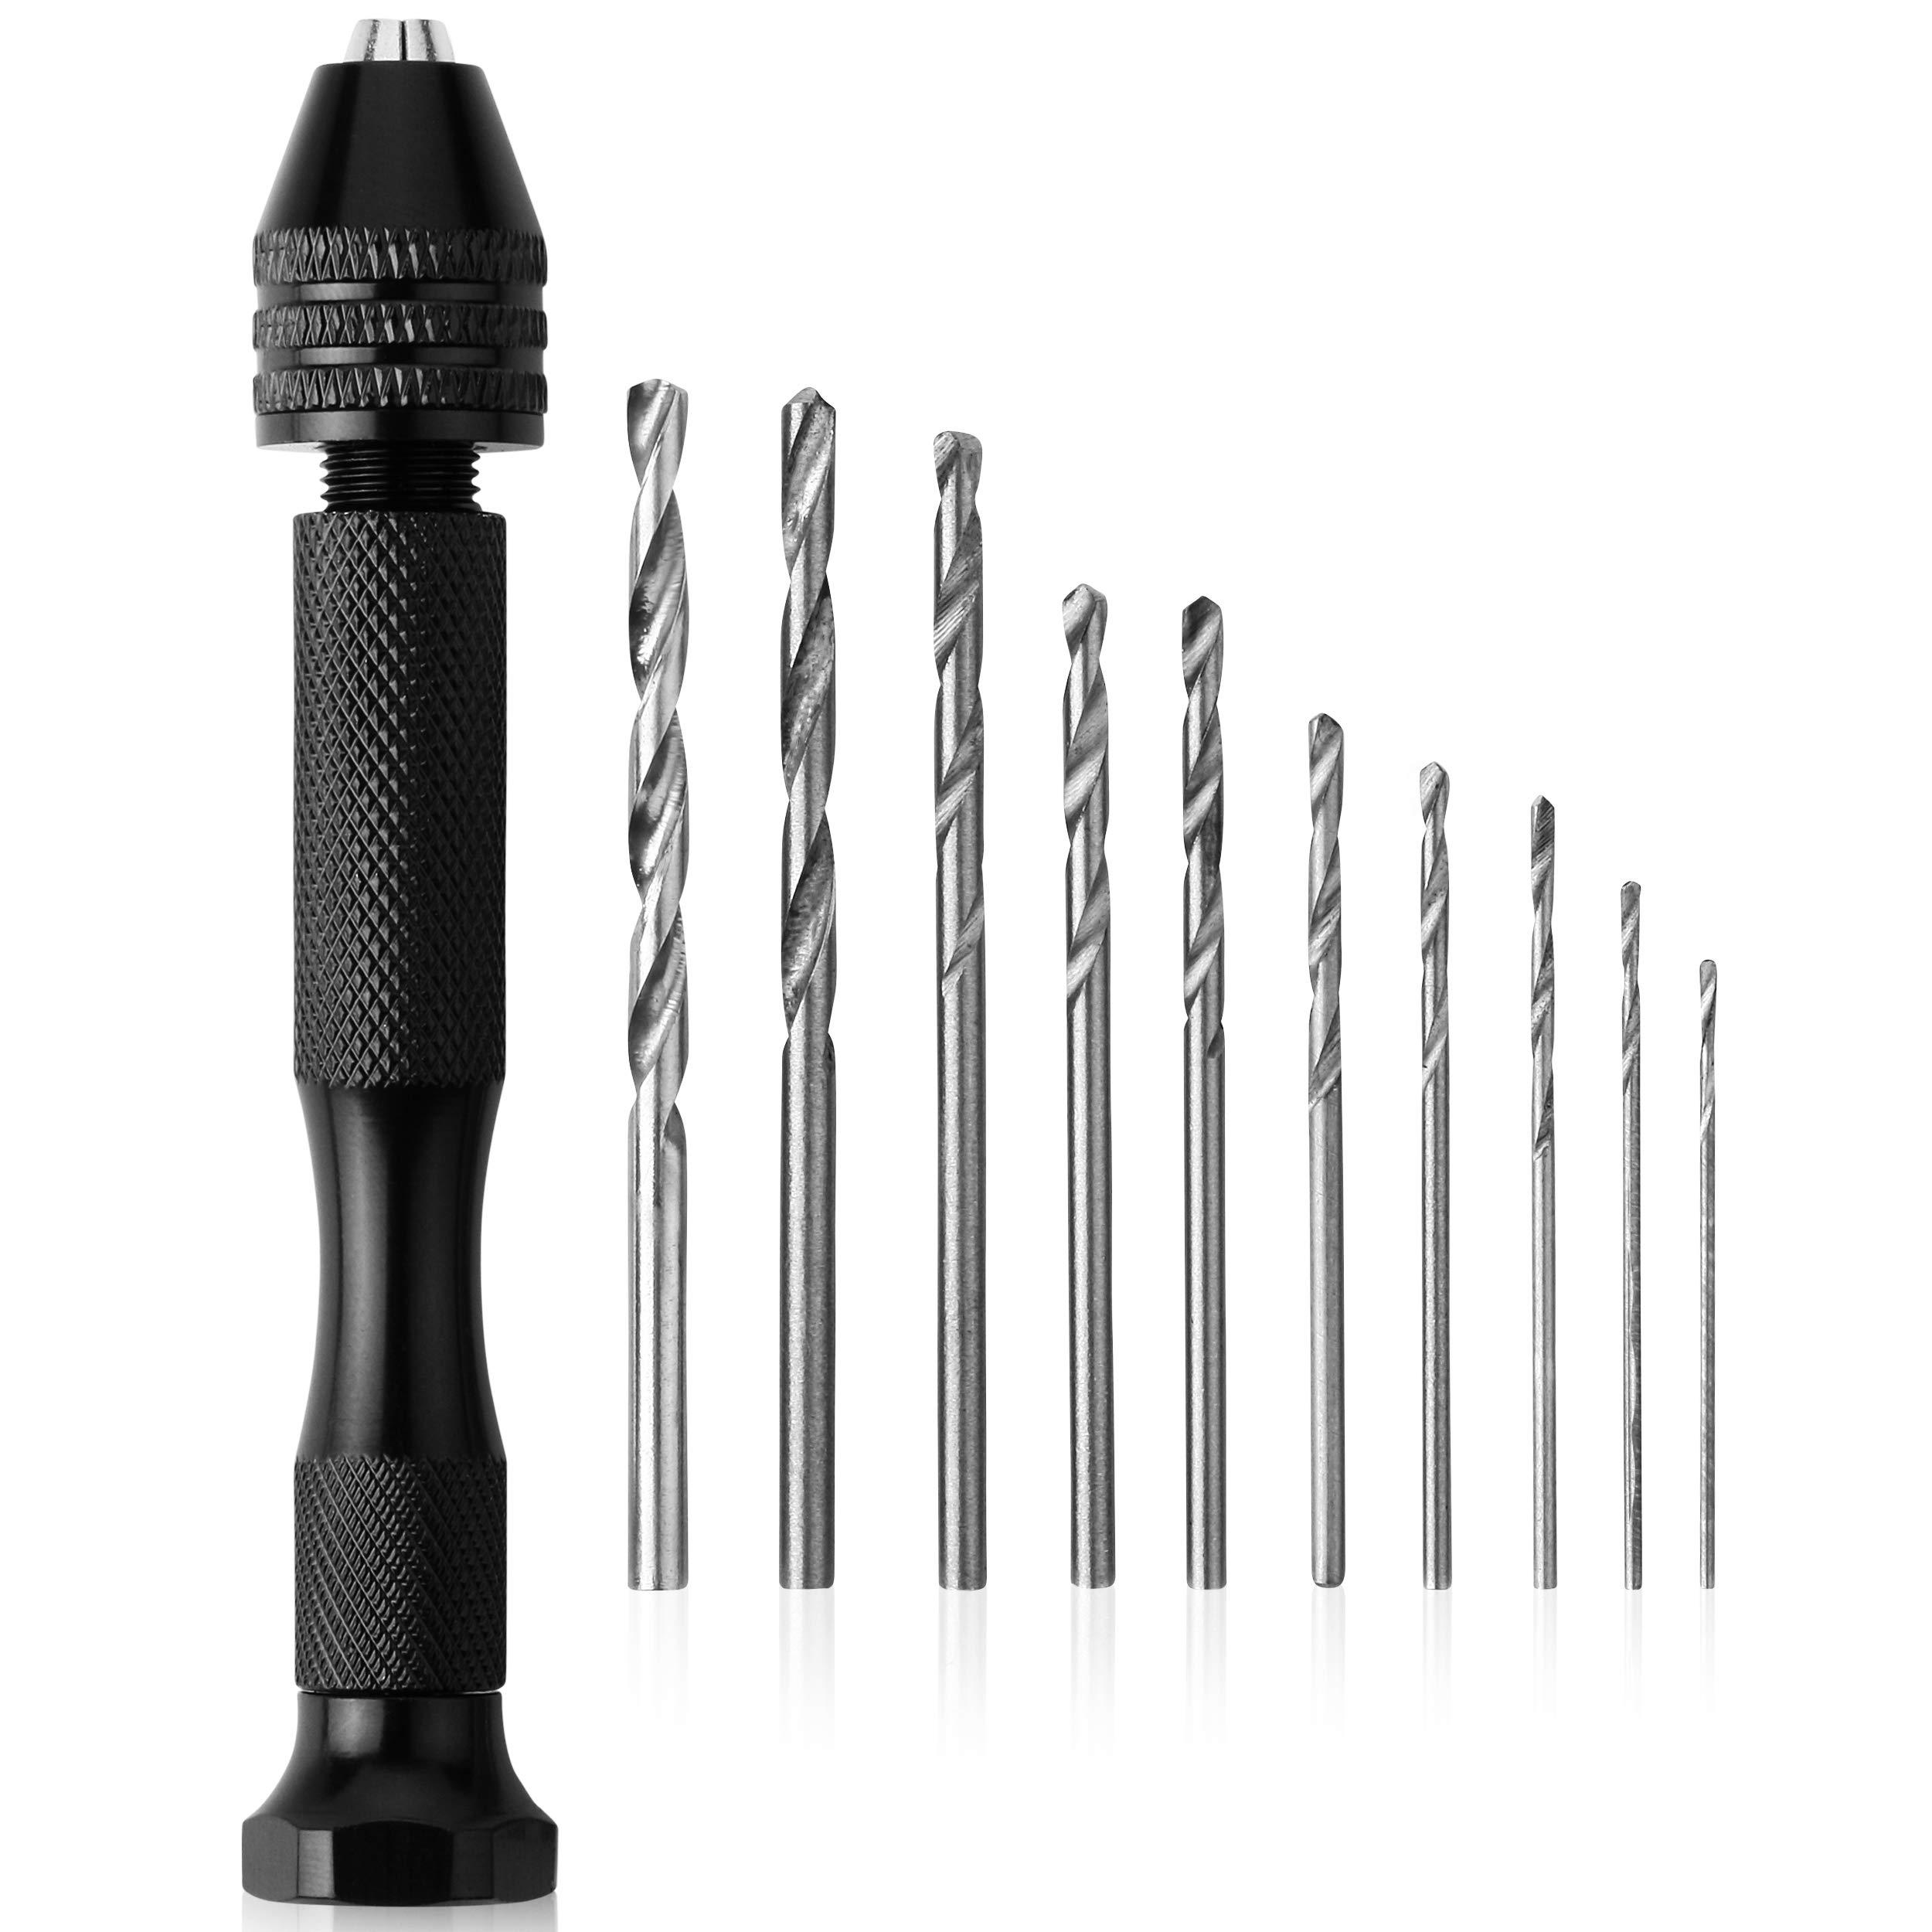 mr. pen- hand drill with 10 drill bits (0.6-3.0mm), jewelry drill, resin drill, mini drill, hand drill for jewelry making, pi